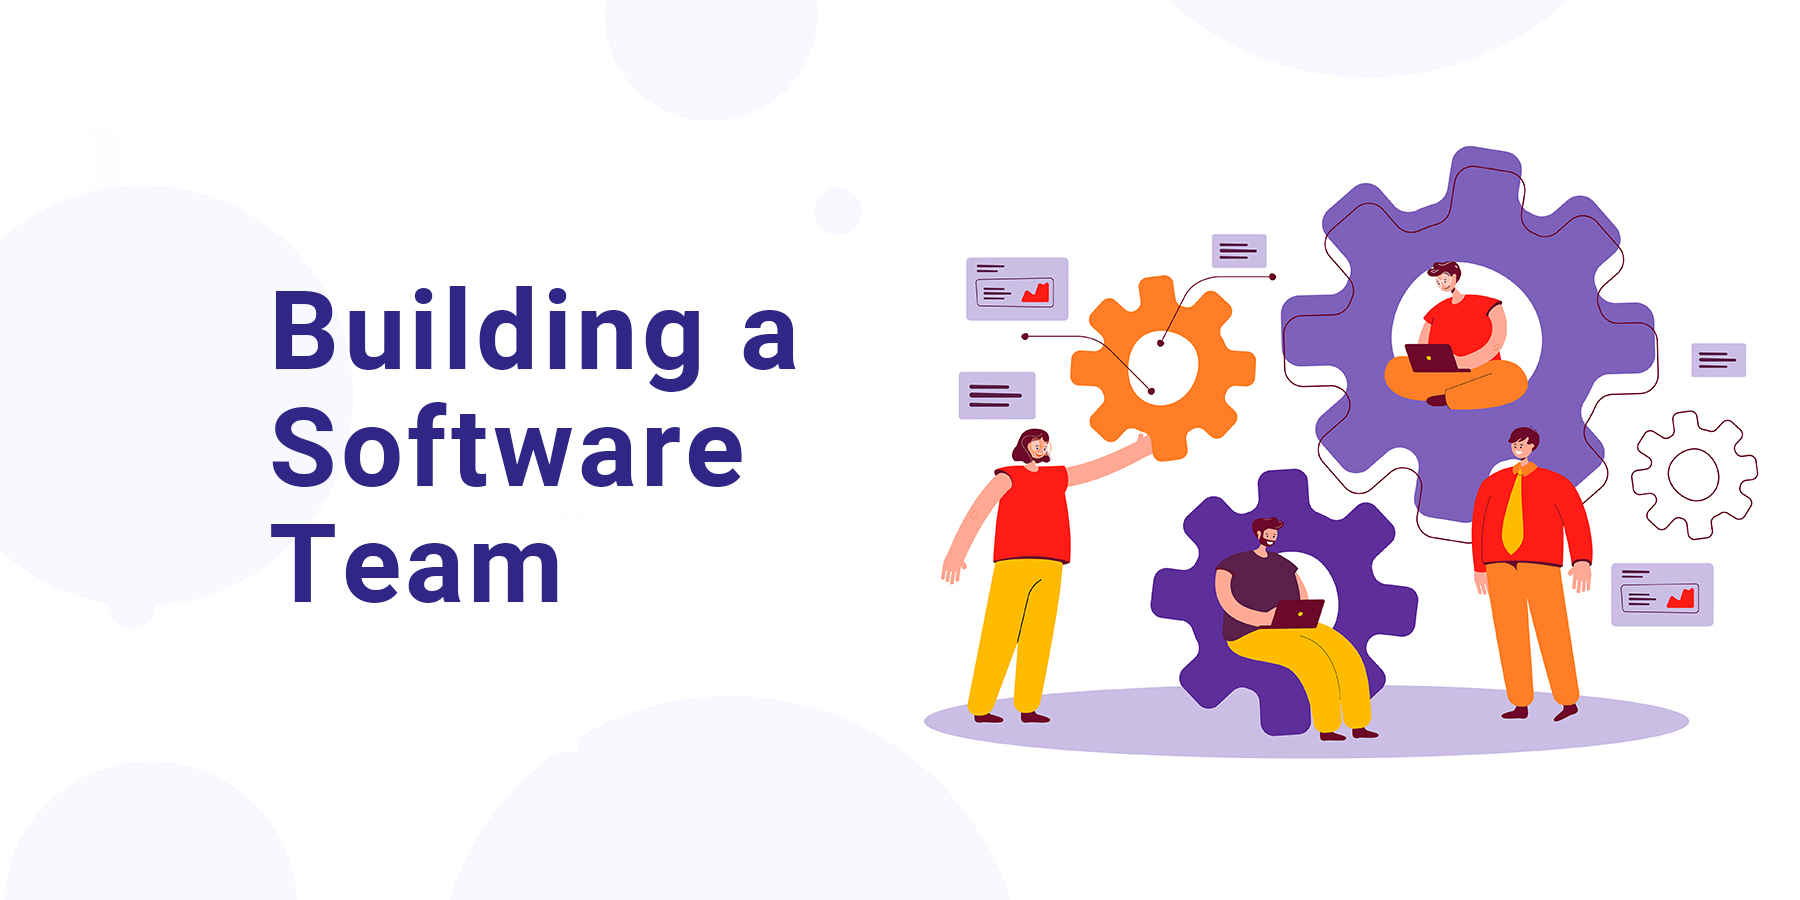 Building Software with the Right Team: Things to Consider